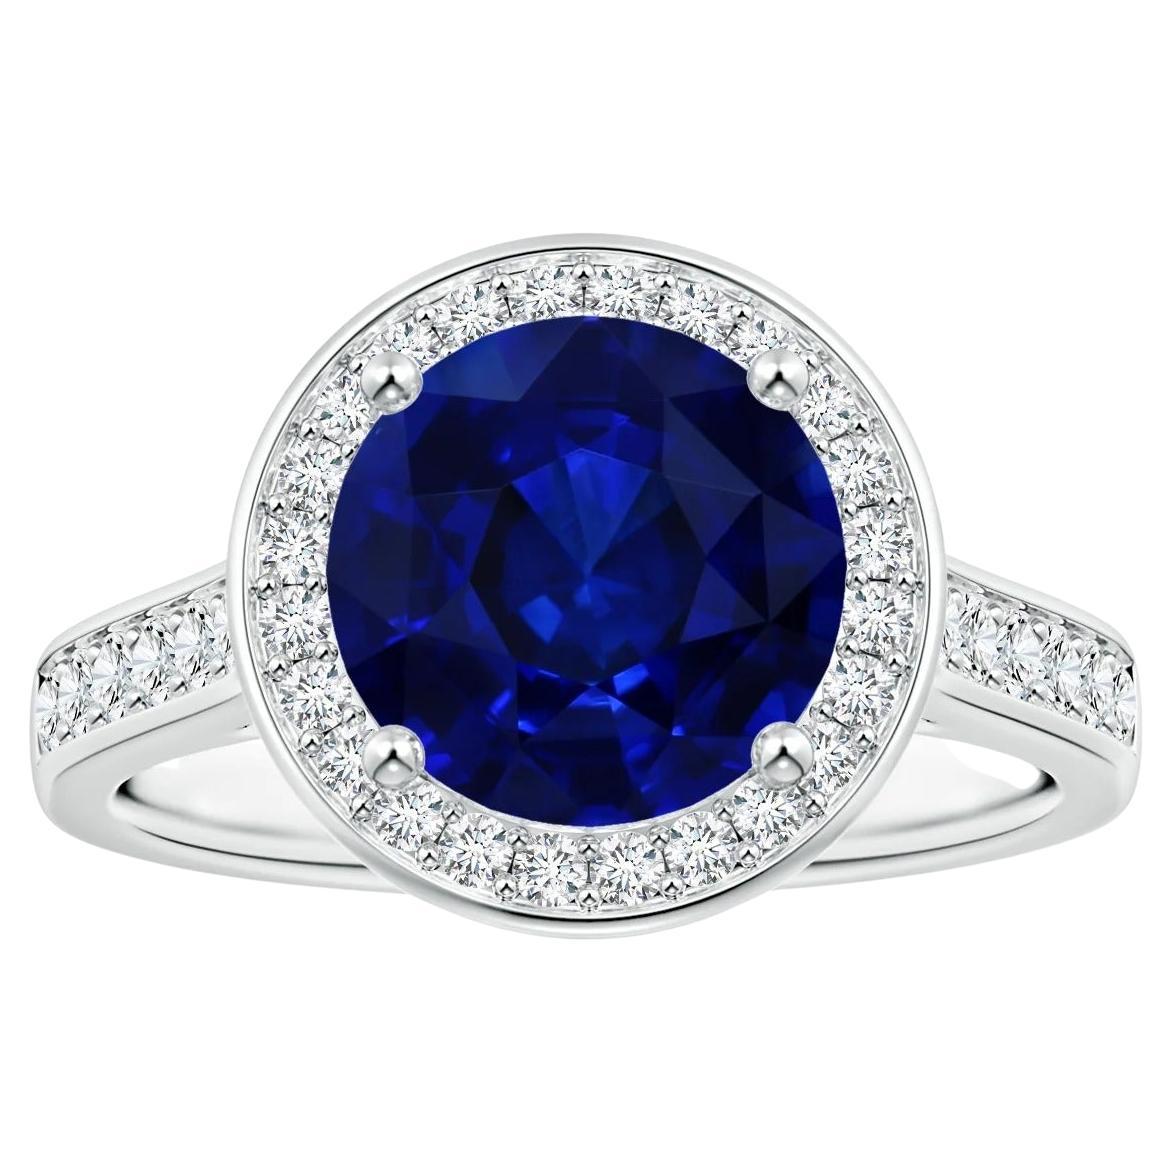 For Sale:  Angara GIA Certified Blue Sapphire Halo Ring in White Gold with Diamonds